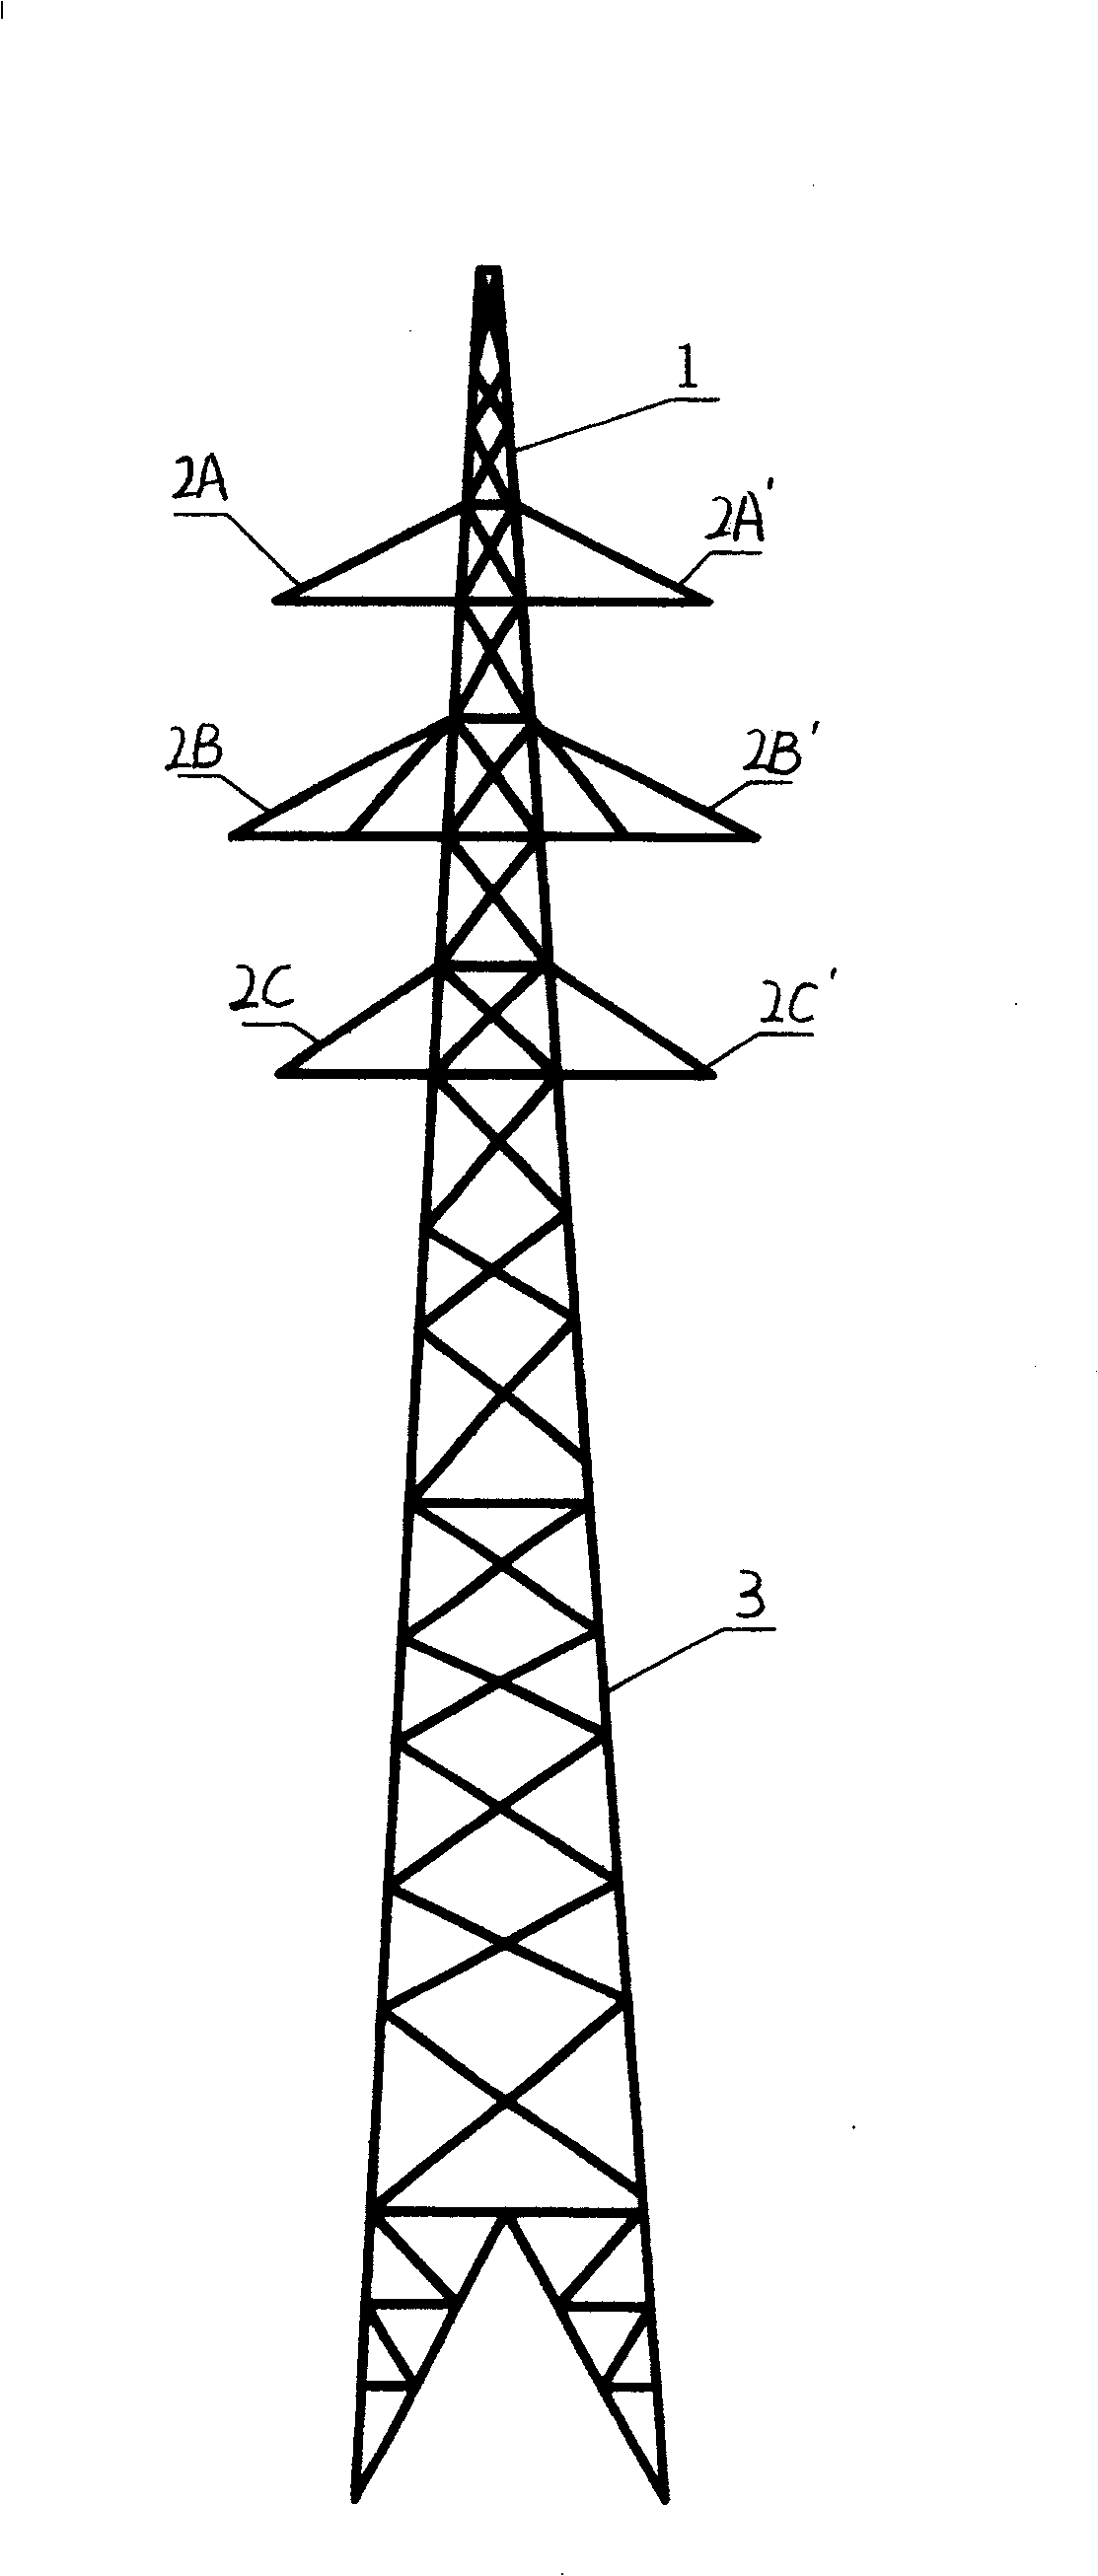 Iron tower for power transmission